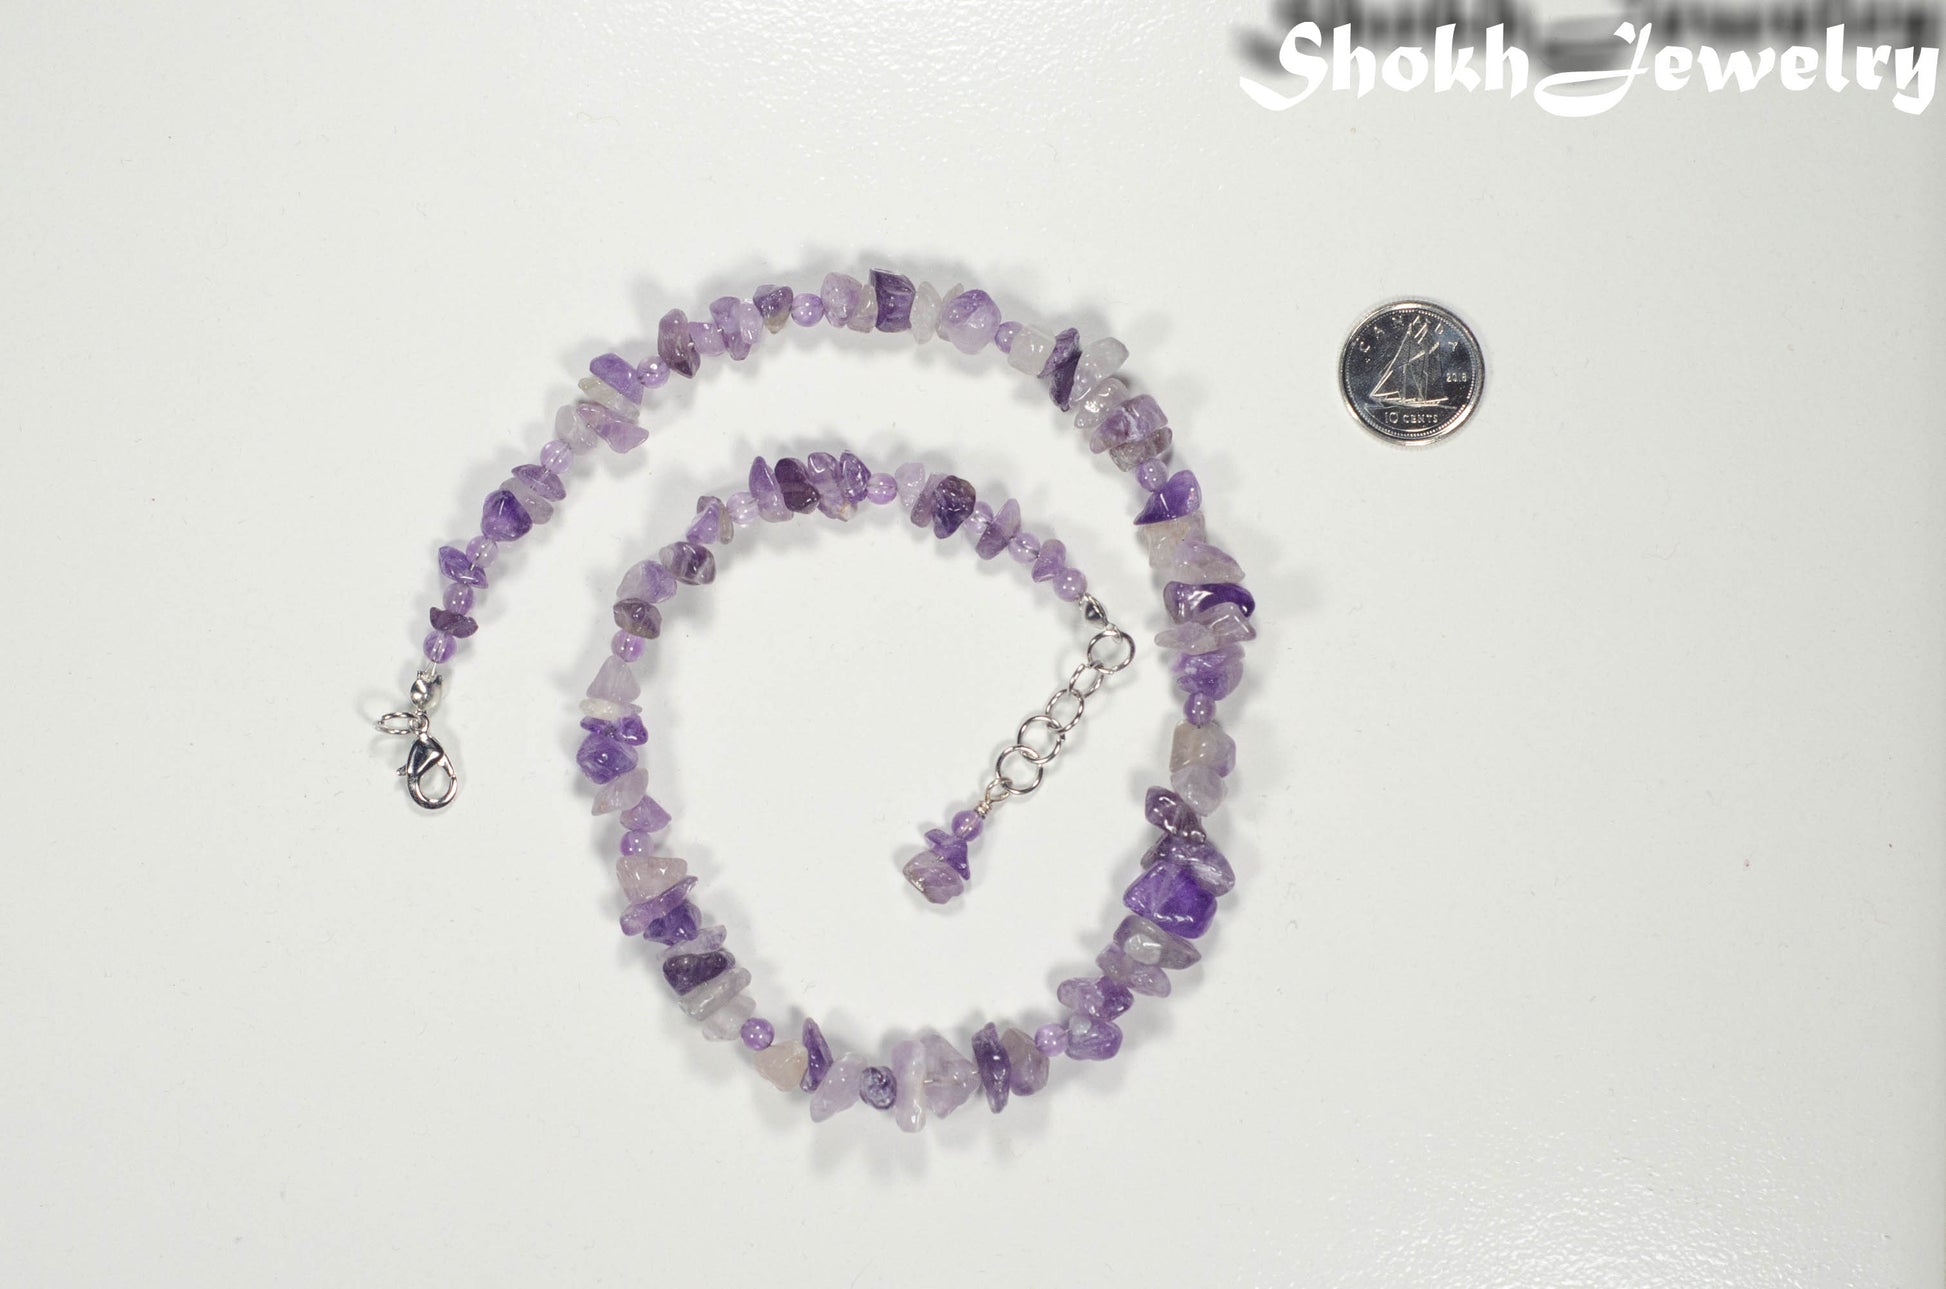 Natural Amethyst Crystal Chip Choker Necklace beside a dime